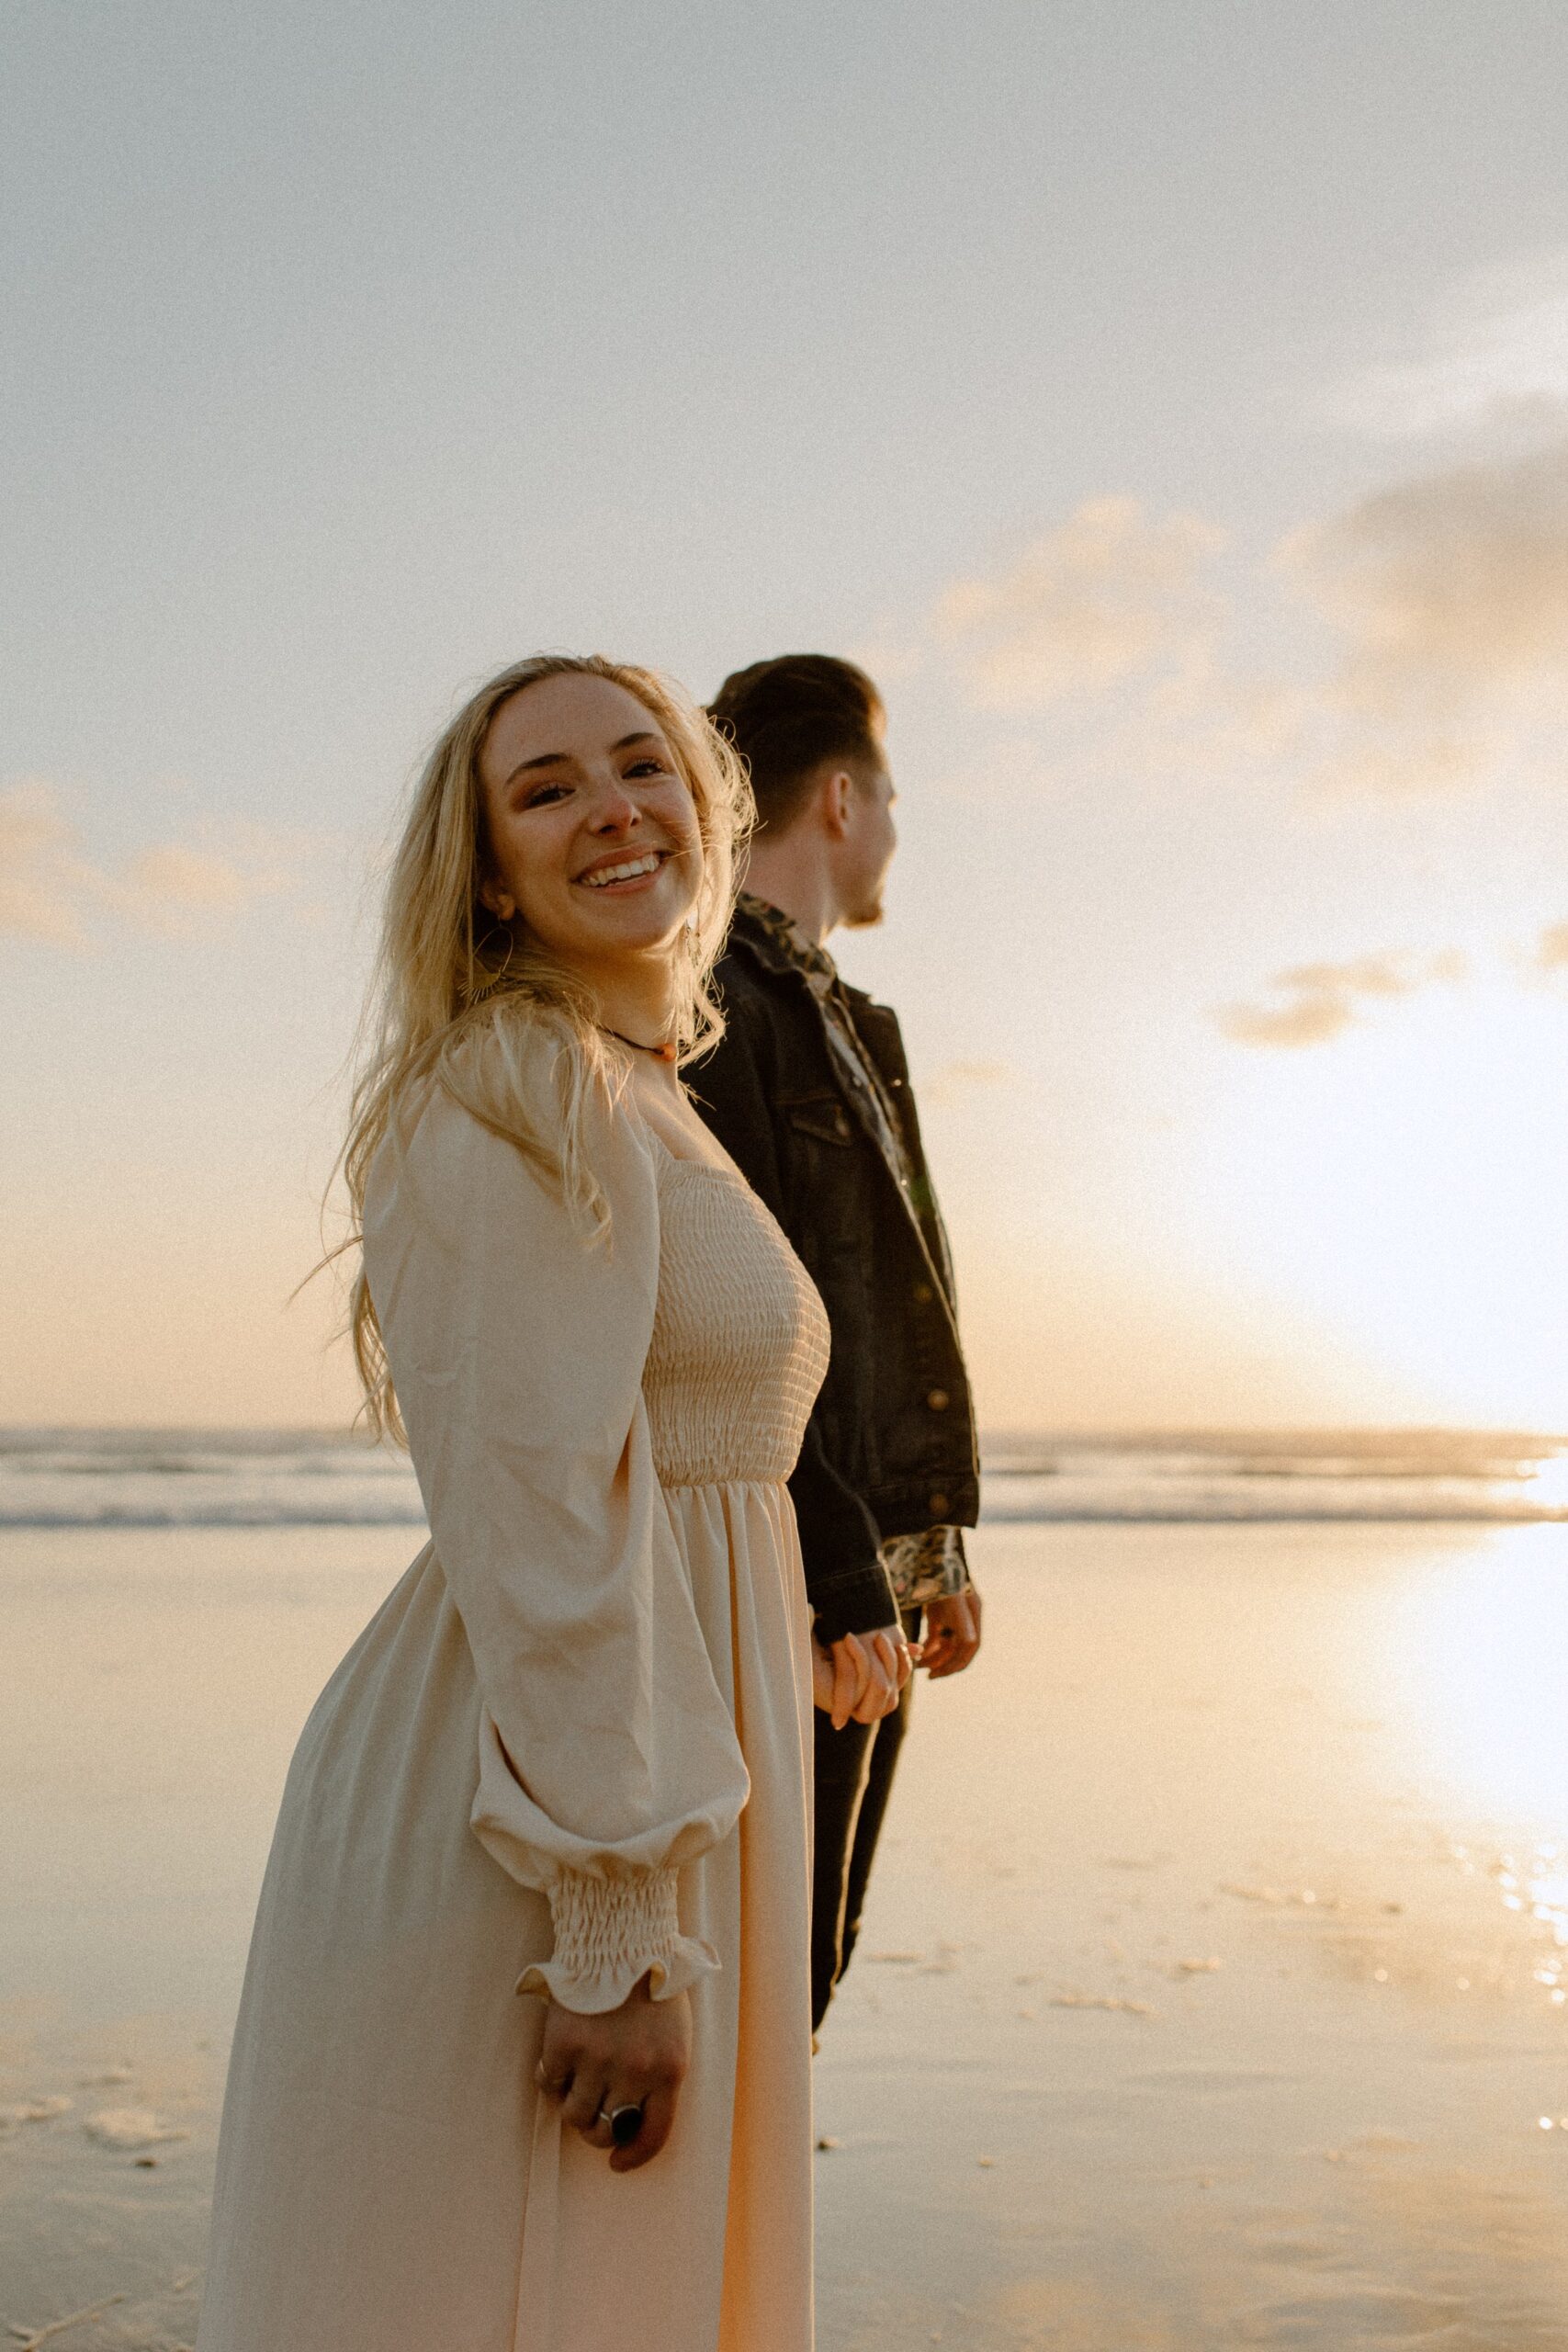  woman smiling at camera while holding mans hand and standing on beach near ocean 